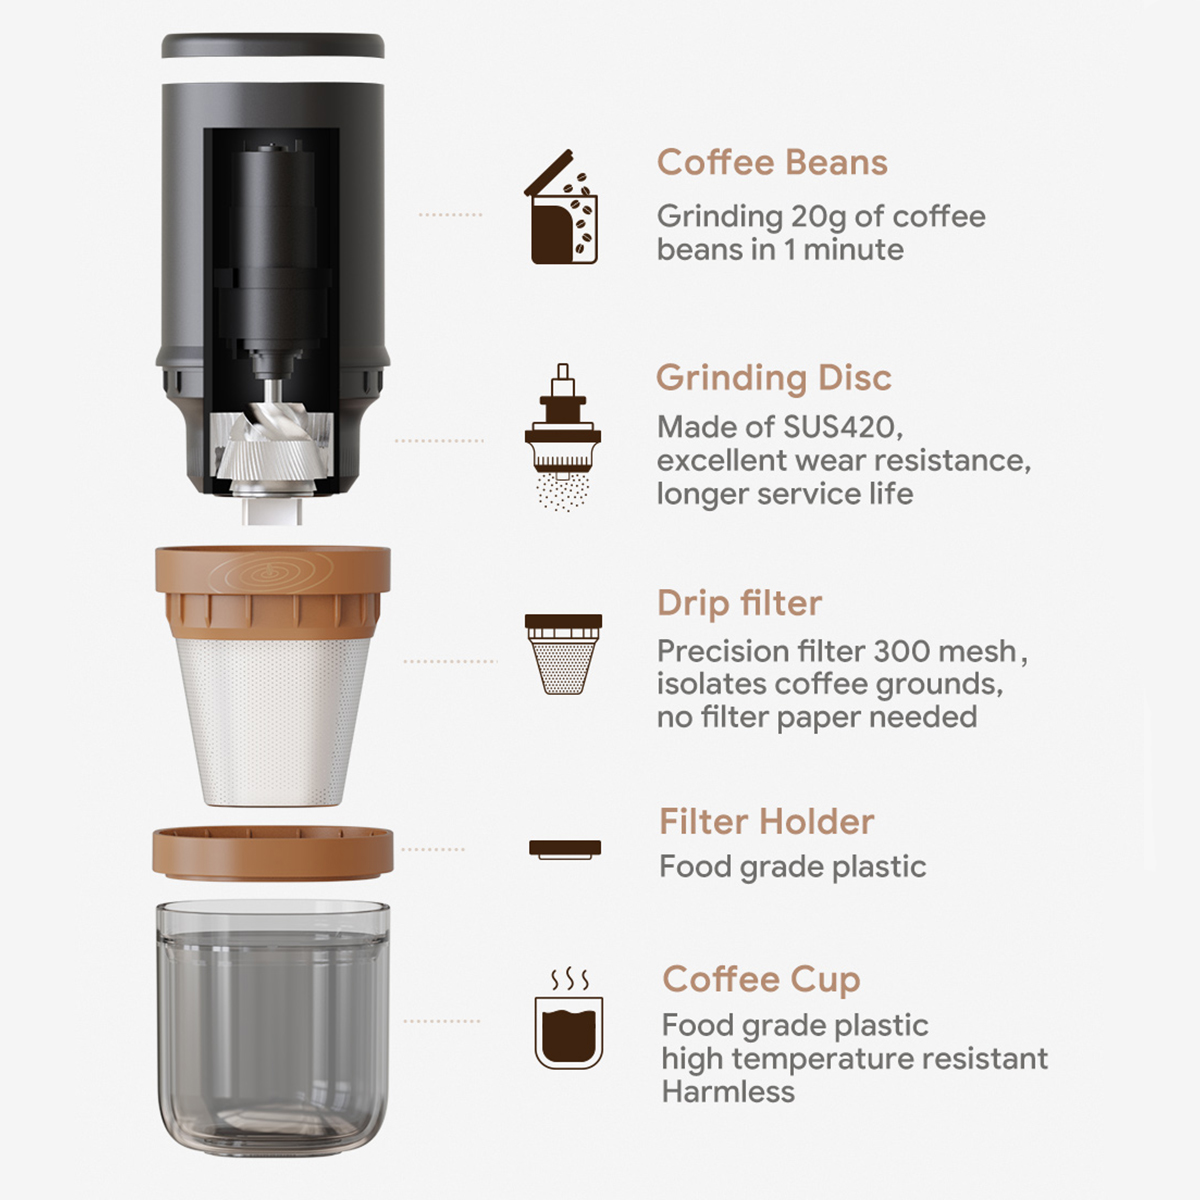 All-in-one Grinding & Brewing Portable Electric Coffee Grinder Profession Multifunctional Beans Grinder Coffee Maker